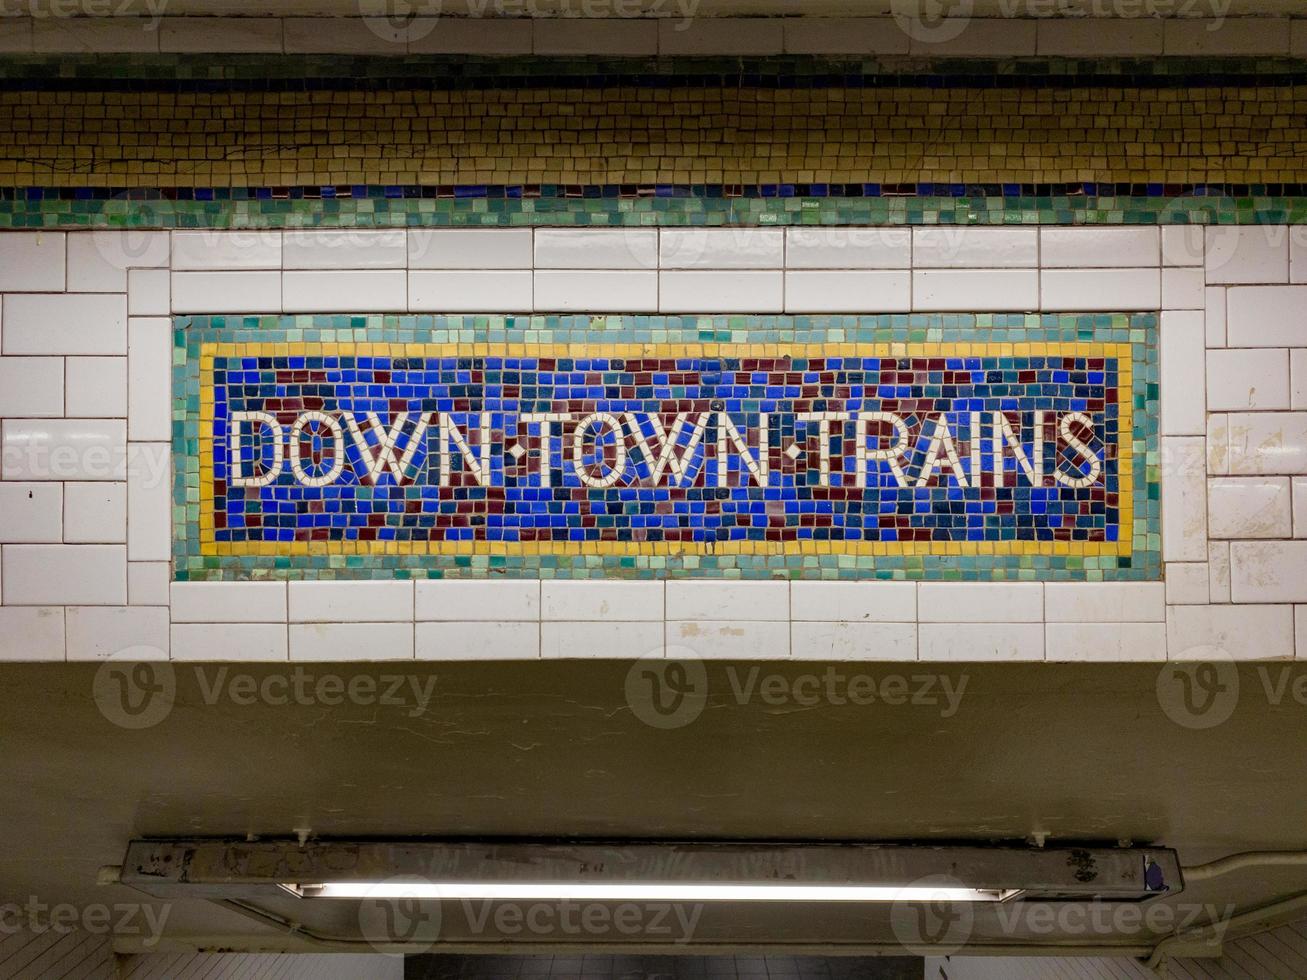 Vintage sign for downtown trains made of mosaic tiles photo